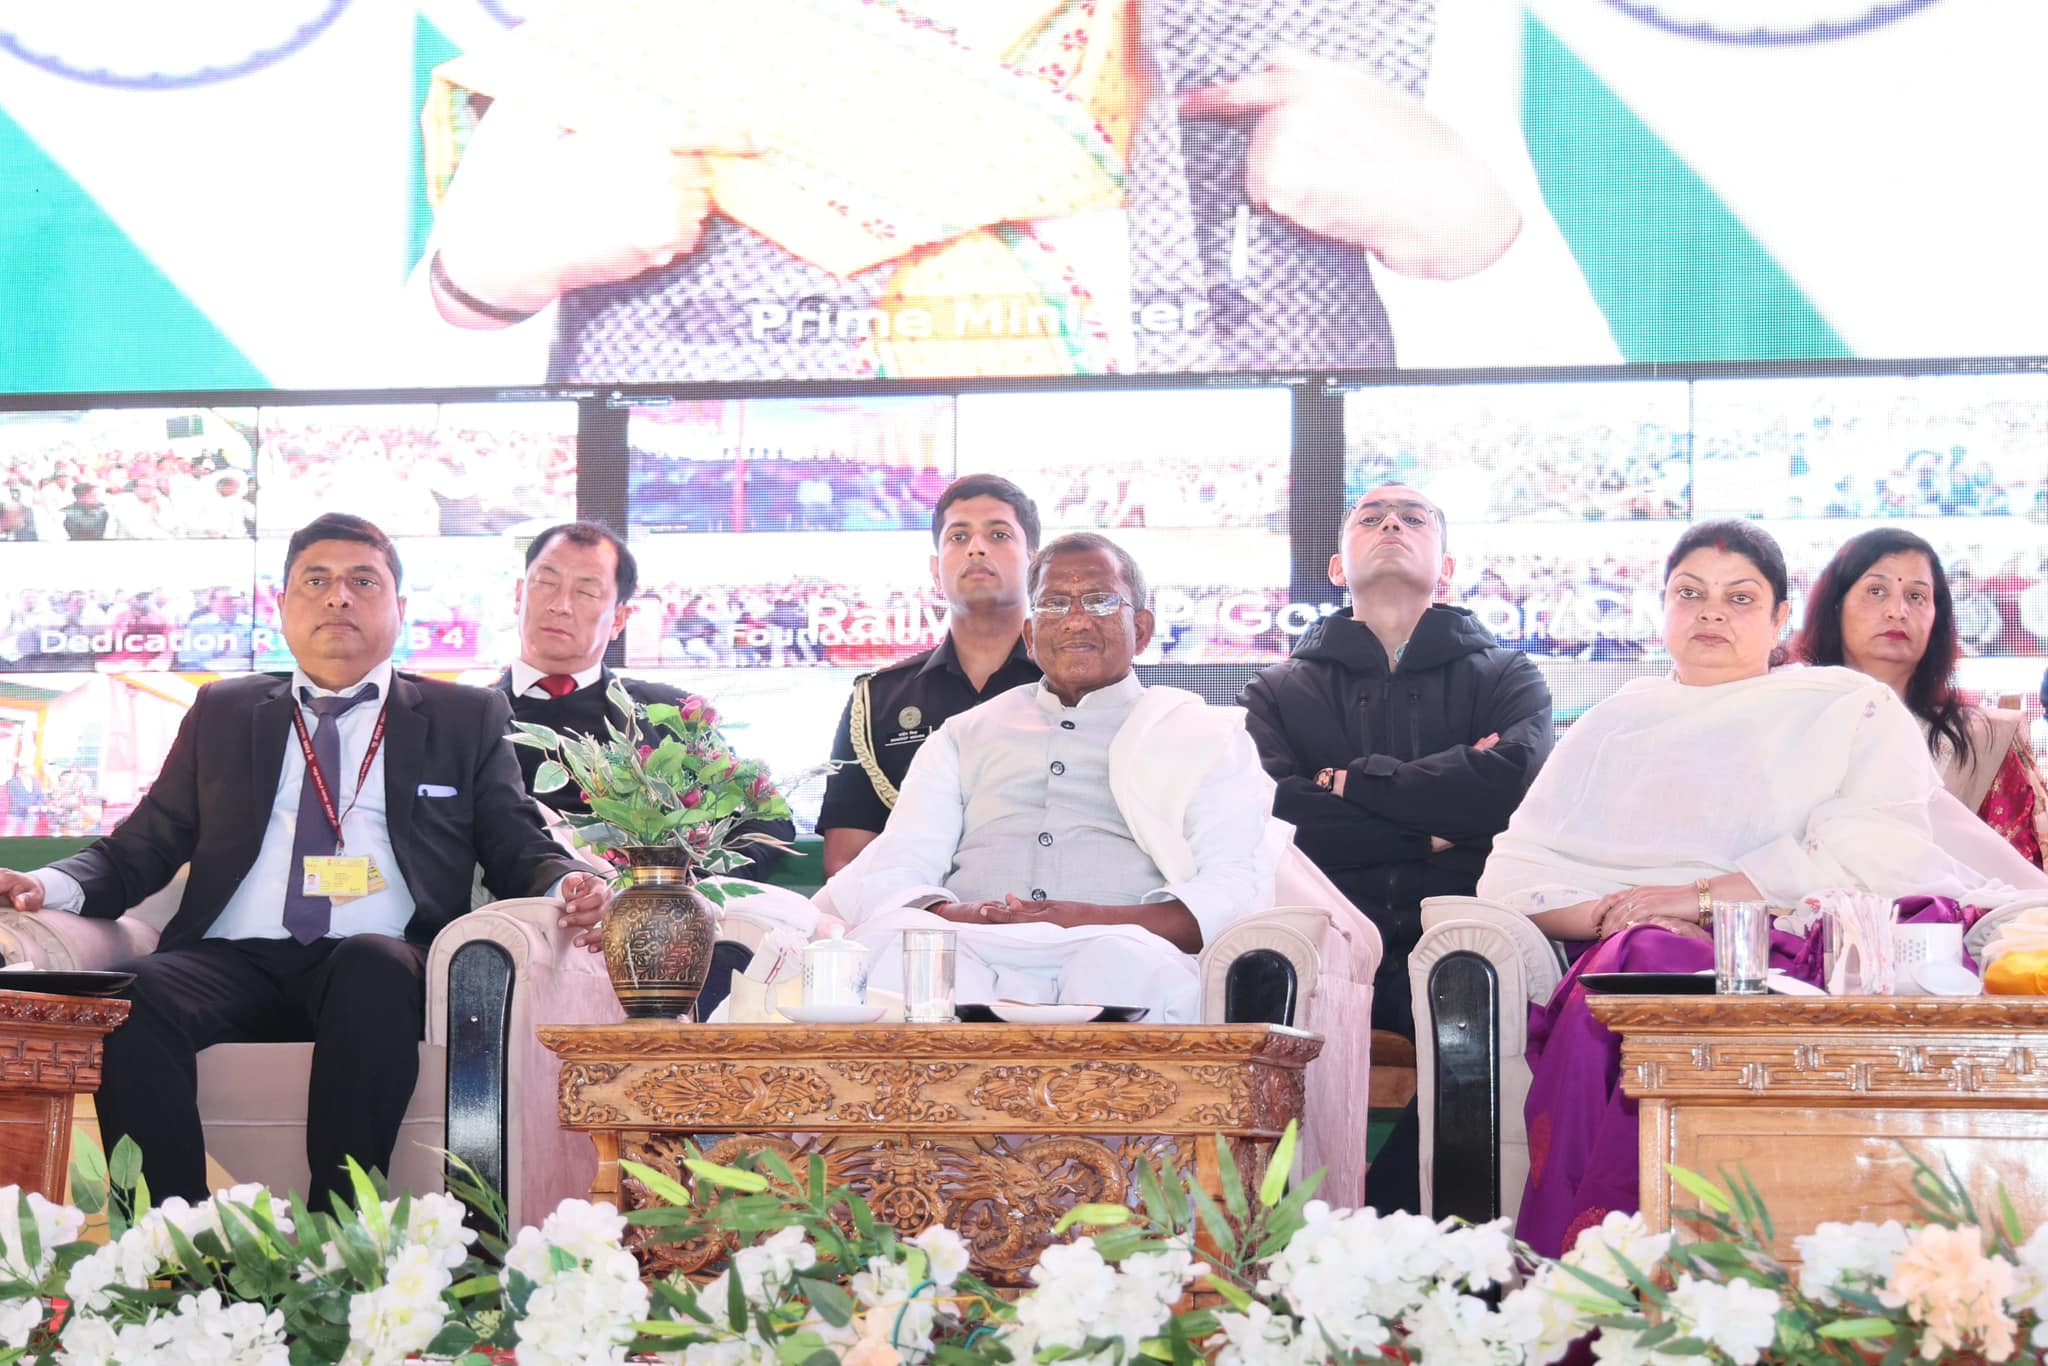 PM Virtually Laid Foundation Stone For Sikkim's First Railway Station At Rangpo In Khanikhola